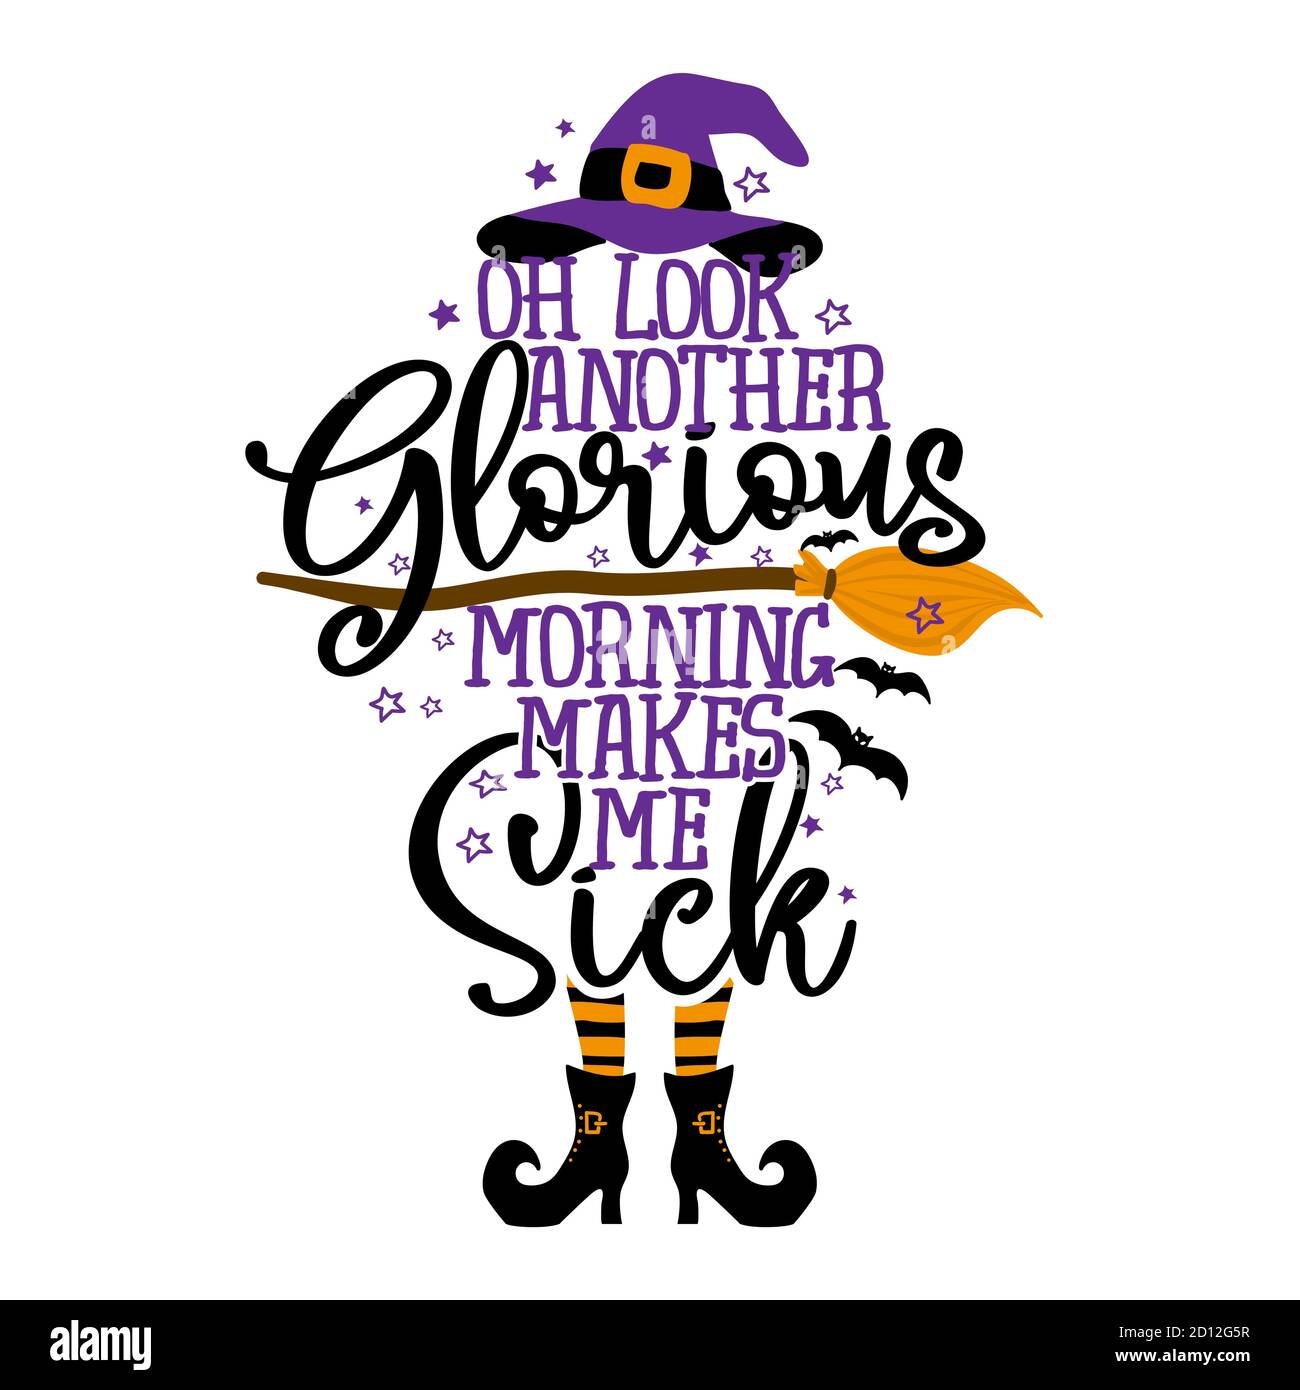 Look Another Glorious Morning Makes Me Sick Halloween Costume Witch Ceramic Mug 